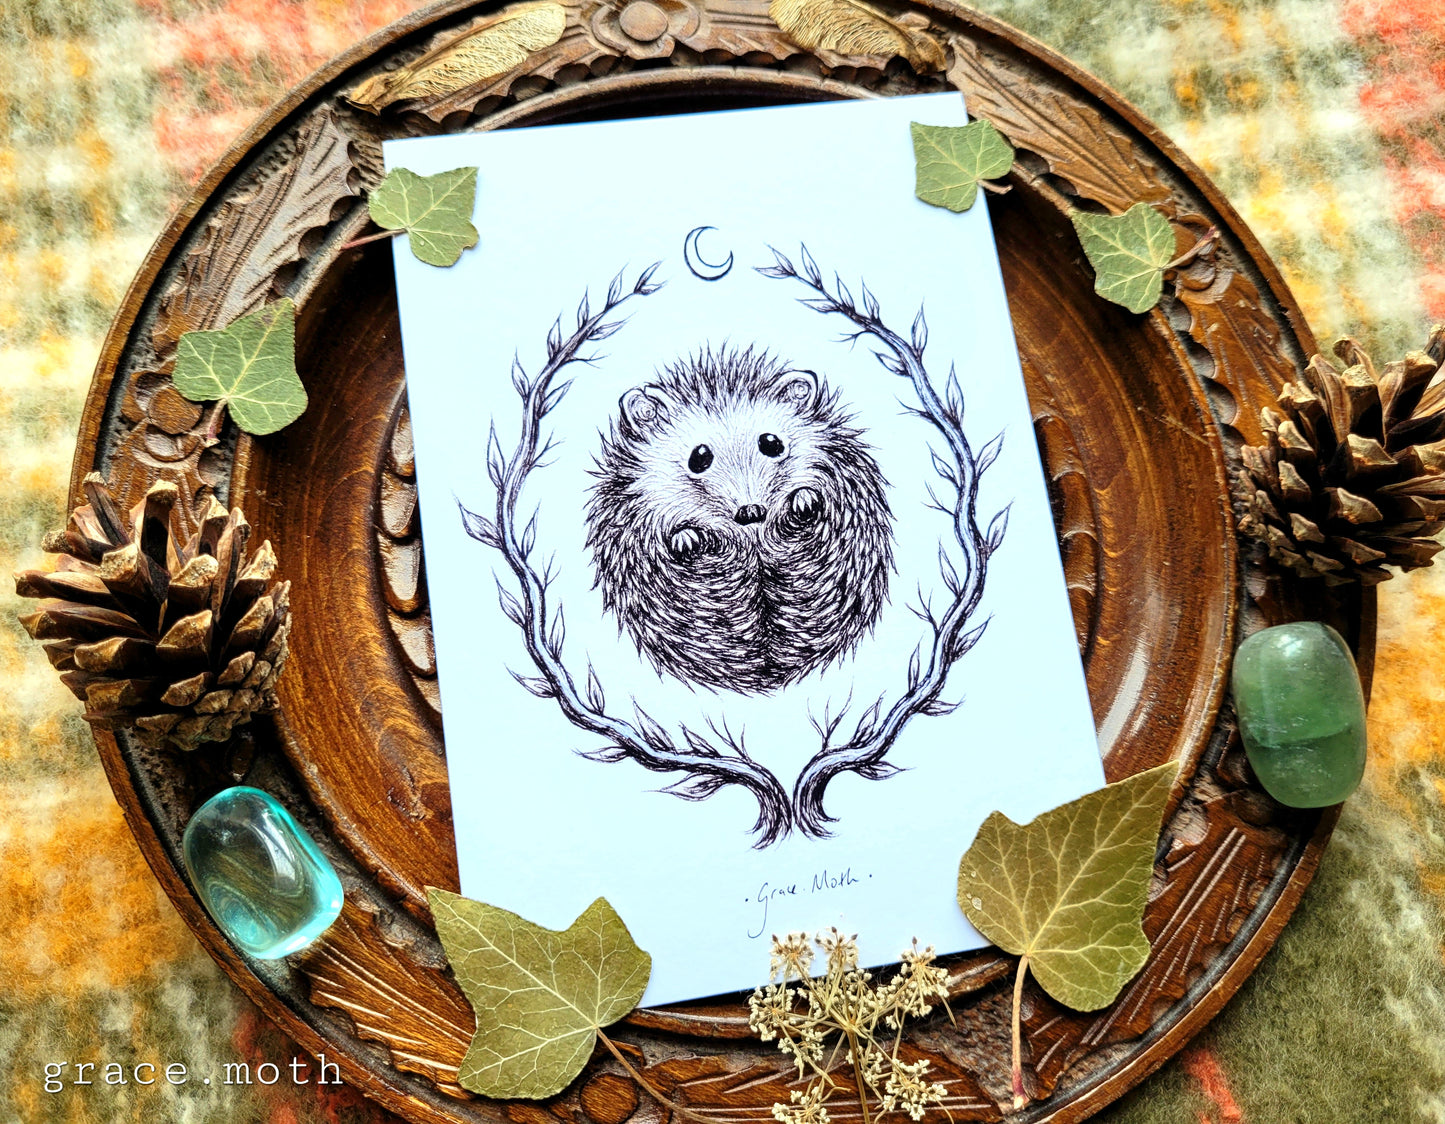 Cute Hedgehog sketch - A6 print by Grace Moth - 5.8 x 4.1 - Cottagecore - Gothic - Witchy